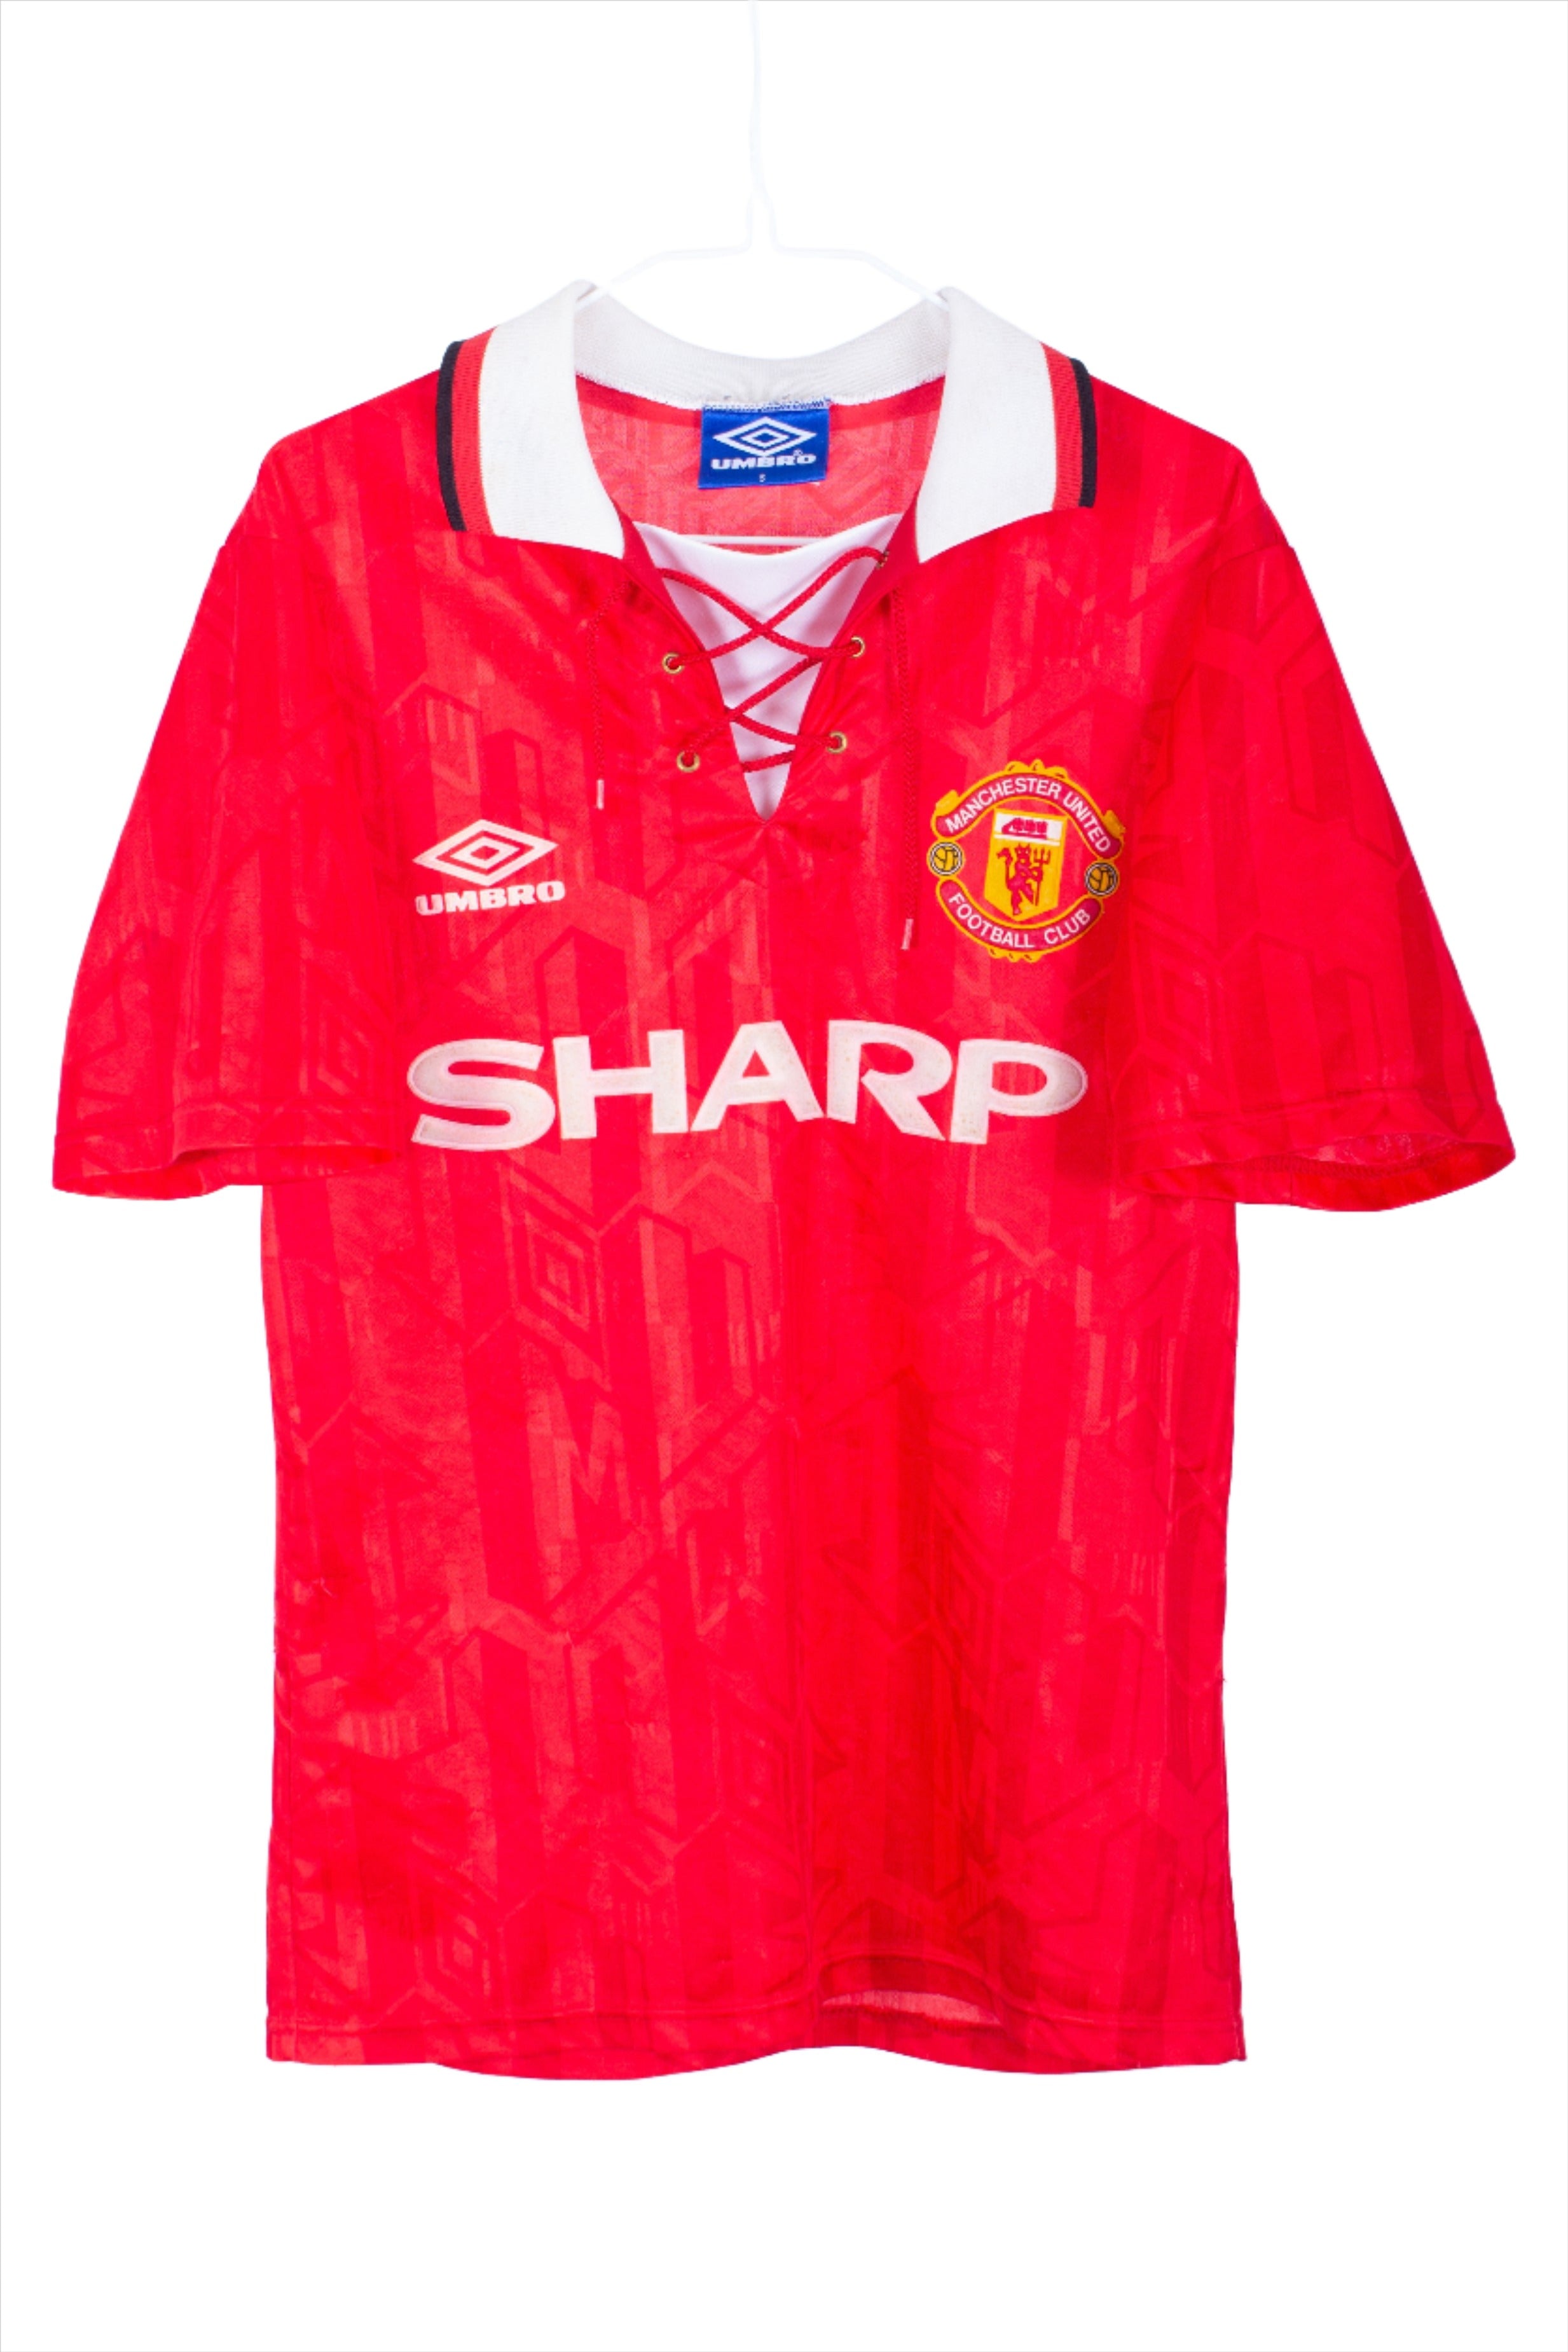 Vintage Manchester United Shirt, Classic Football Shirt, Classic Premier League Football Shirt